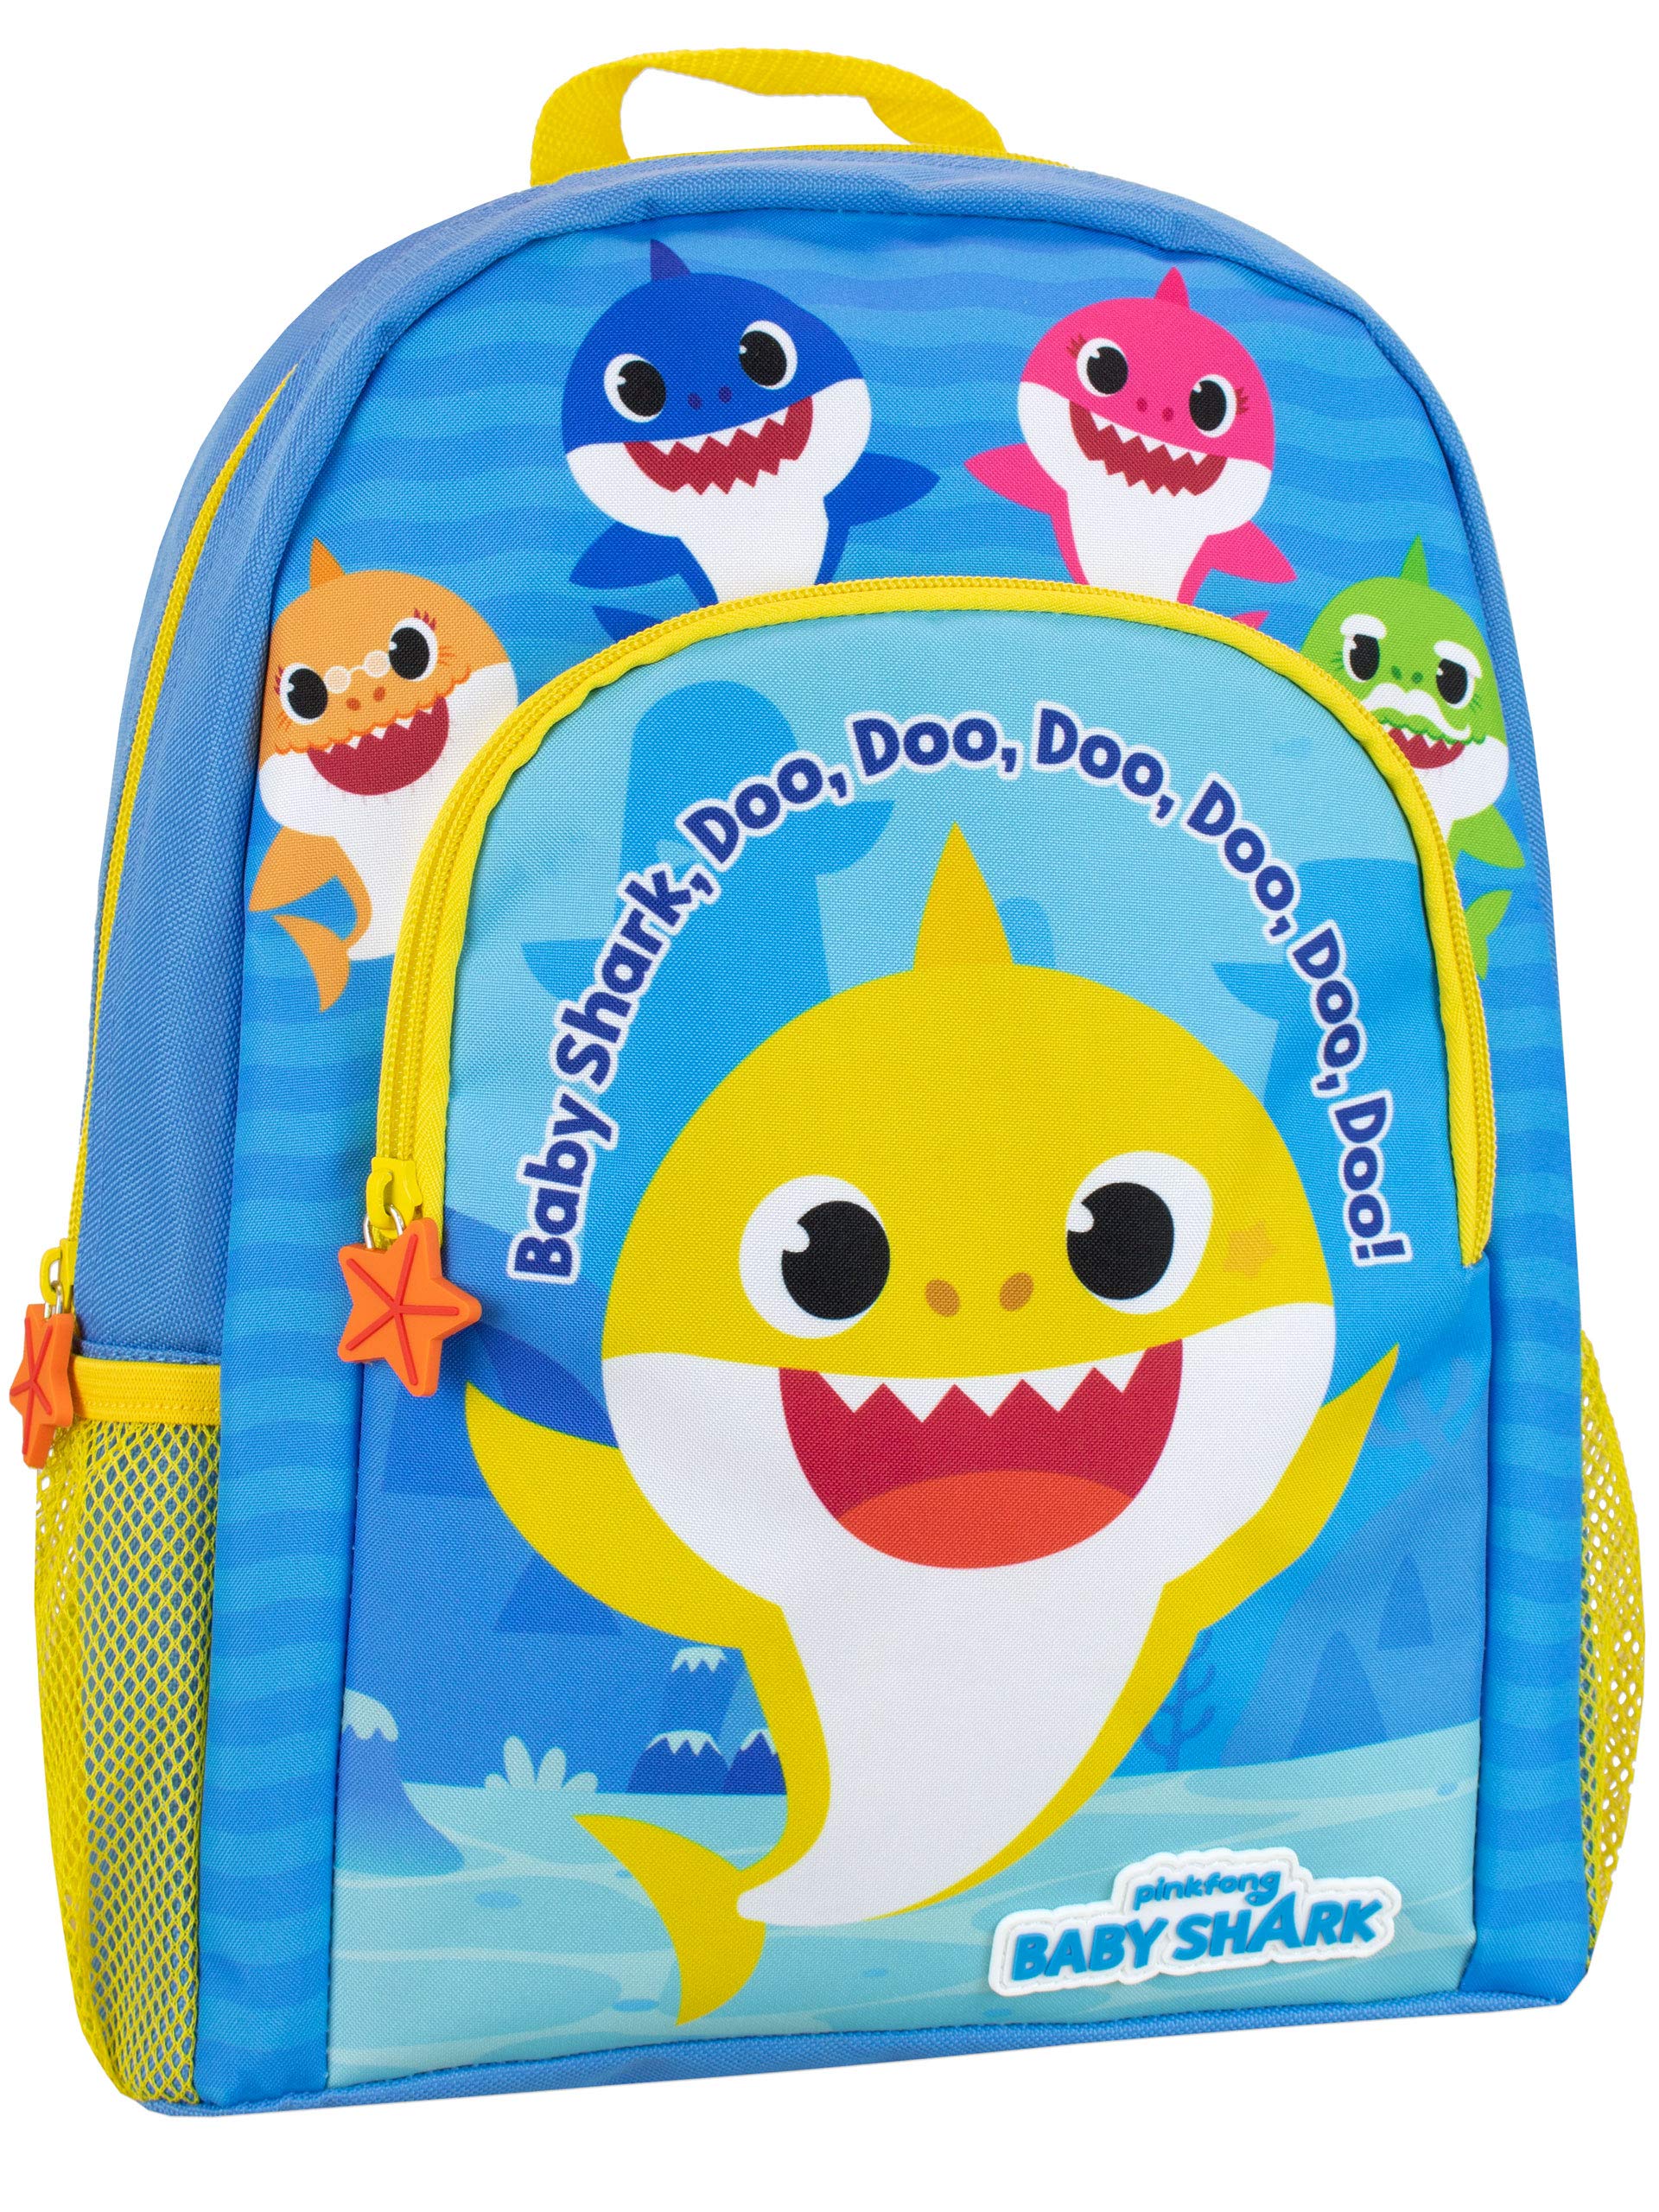 Pinkfong Kids Backpack Baby Shark Blue one size